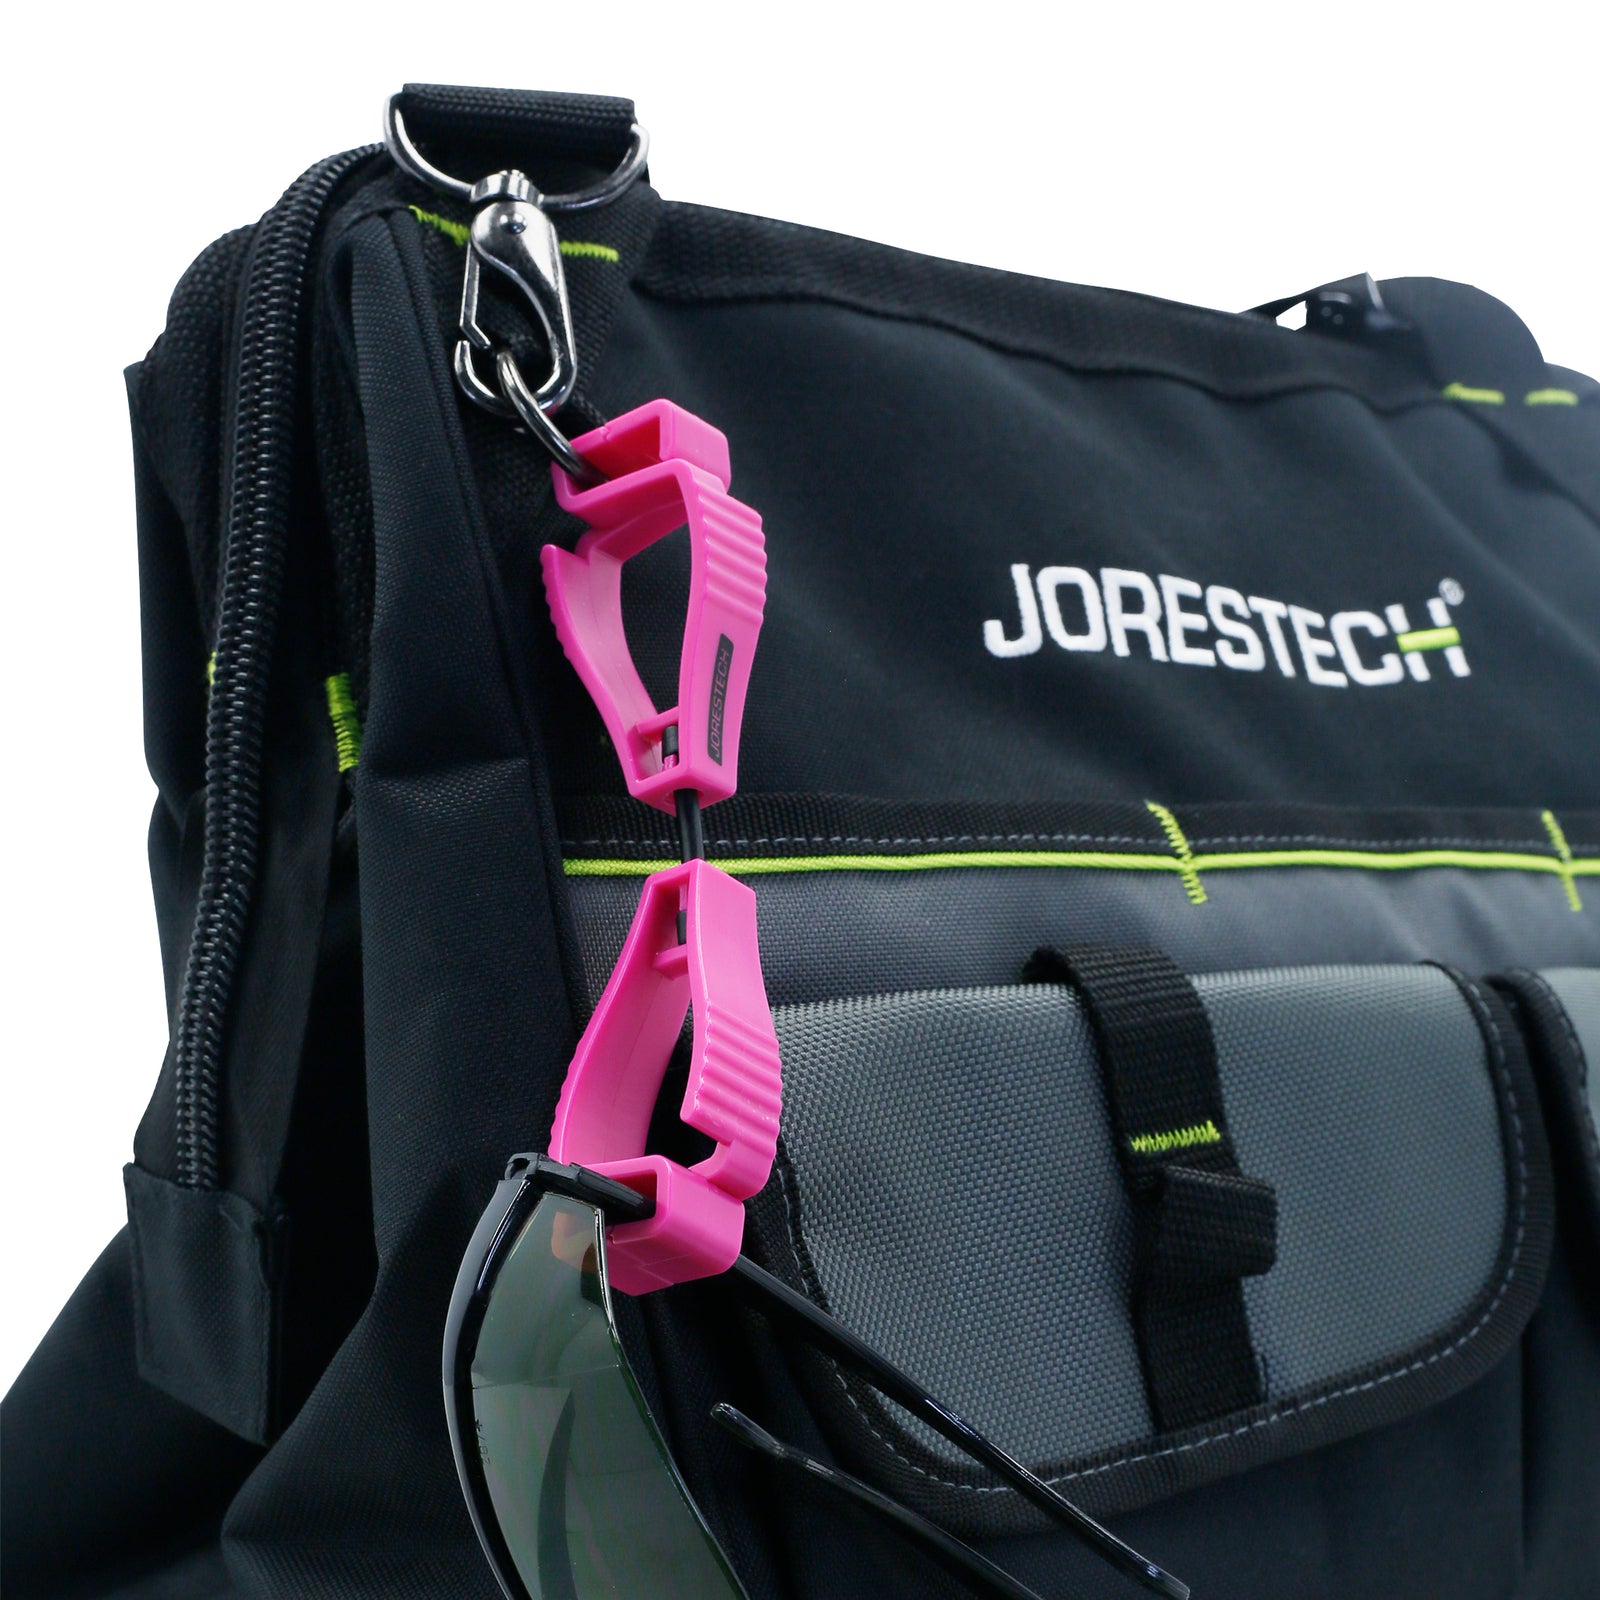 A pink JORESTECH glove clip safety holder attached to a black and gray tool bag